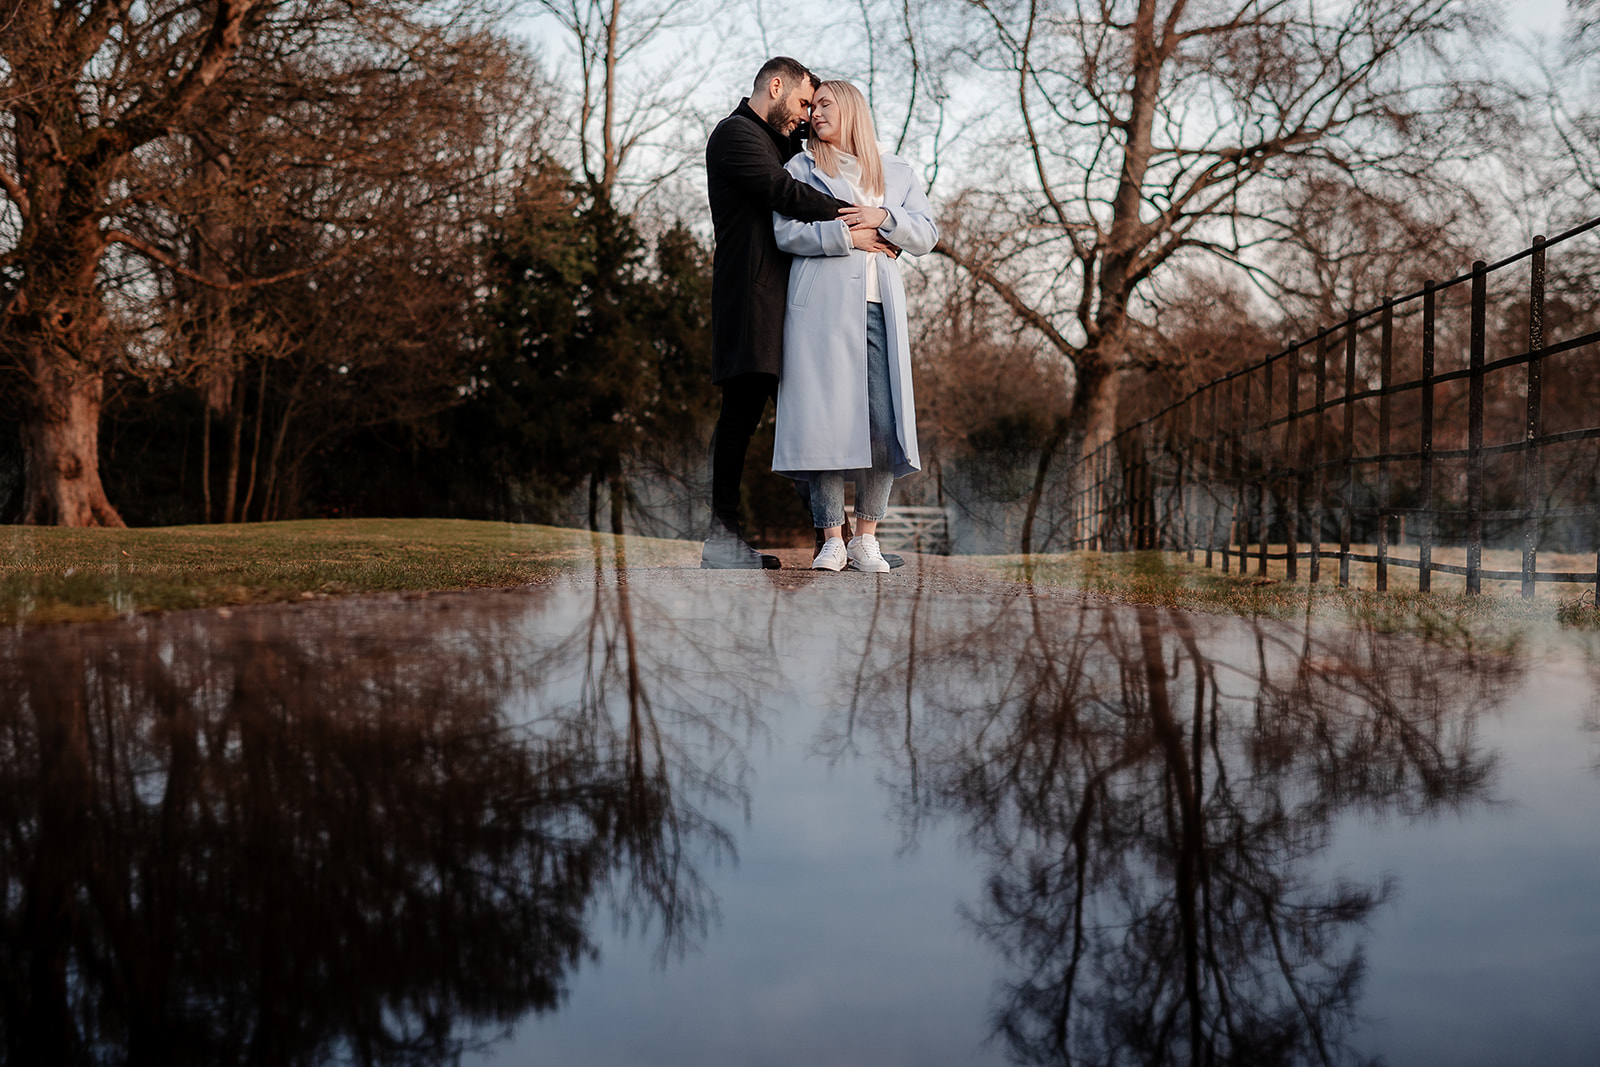 A couple stand with his arms wrapped around her on a country path, the treeline reflected on the ground at their feet